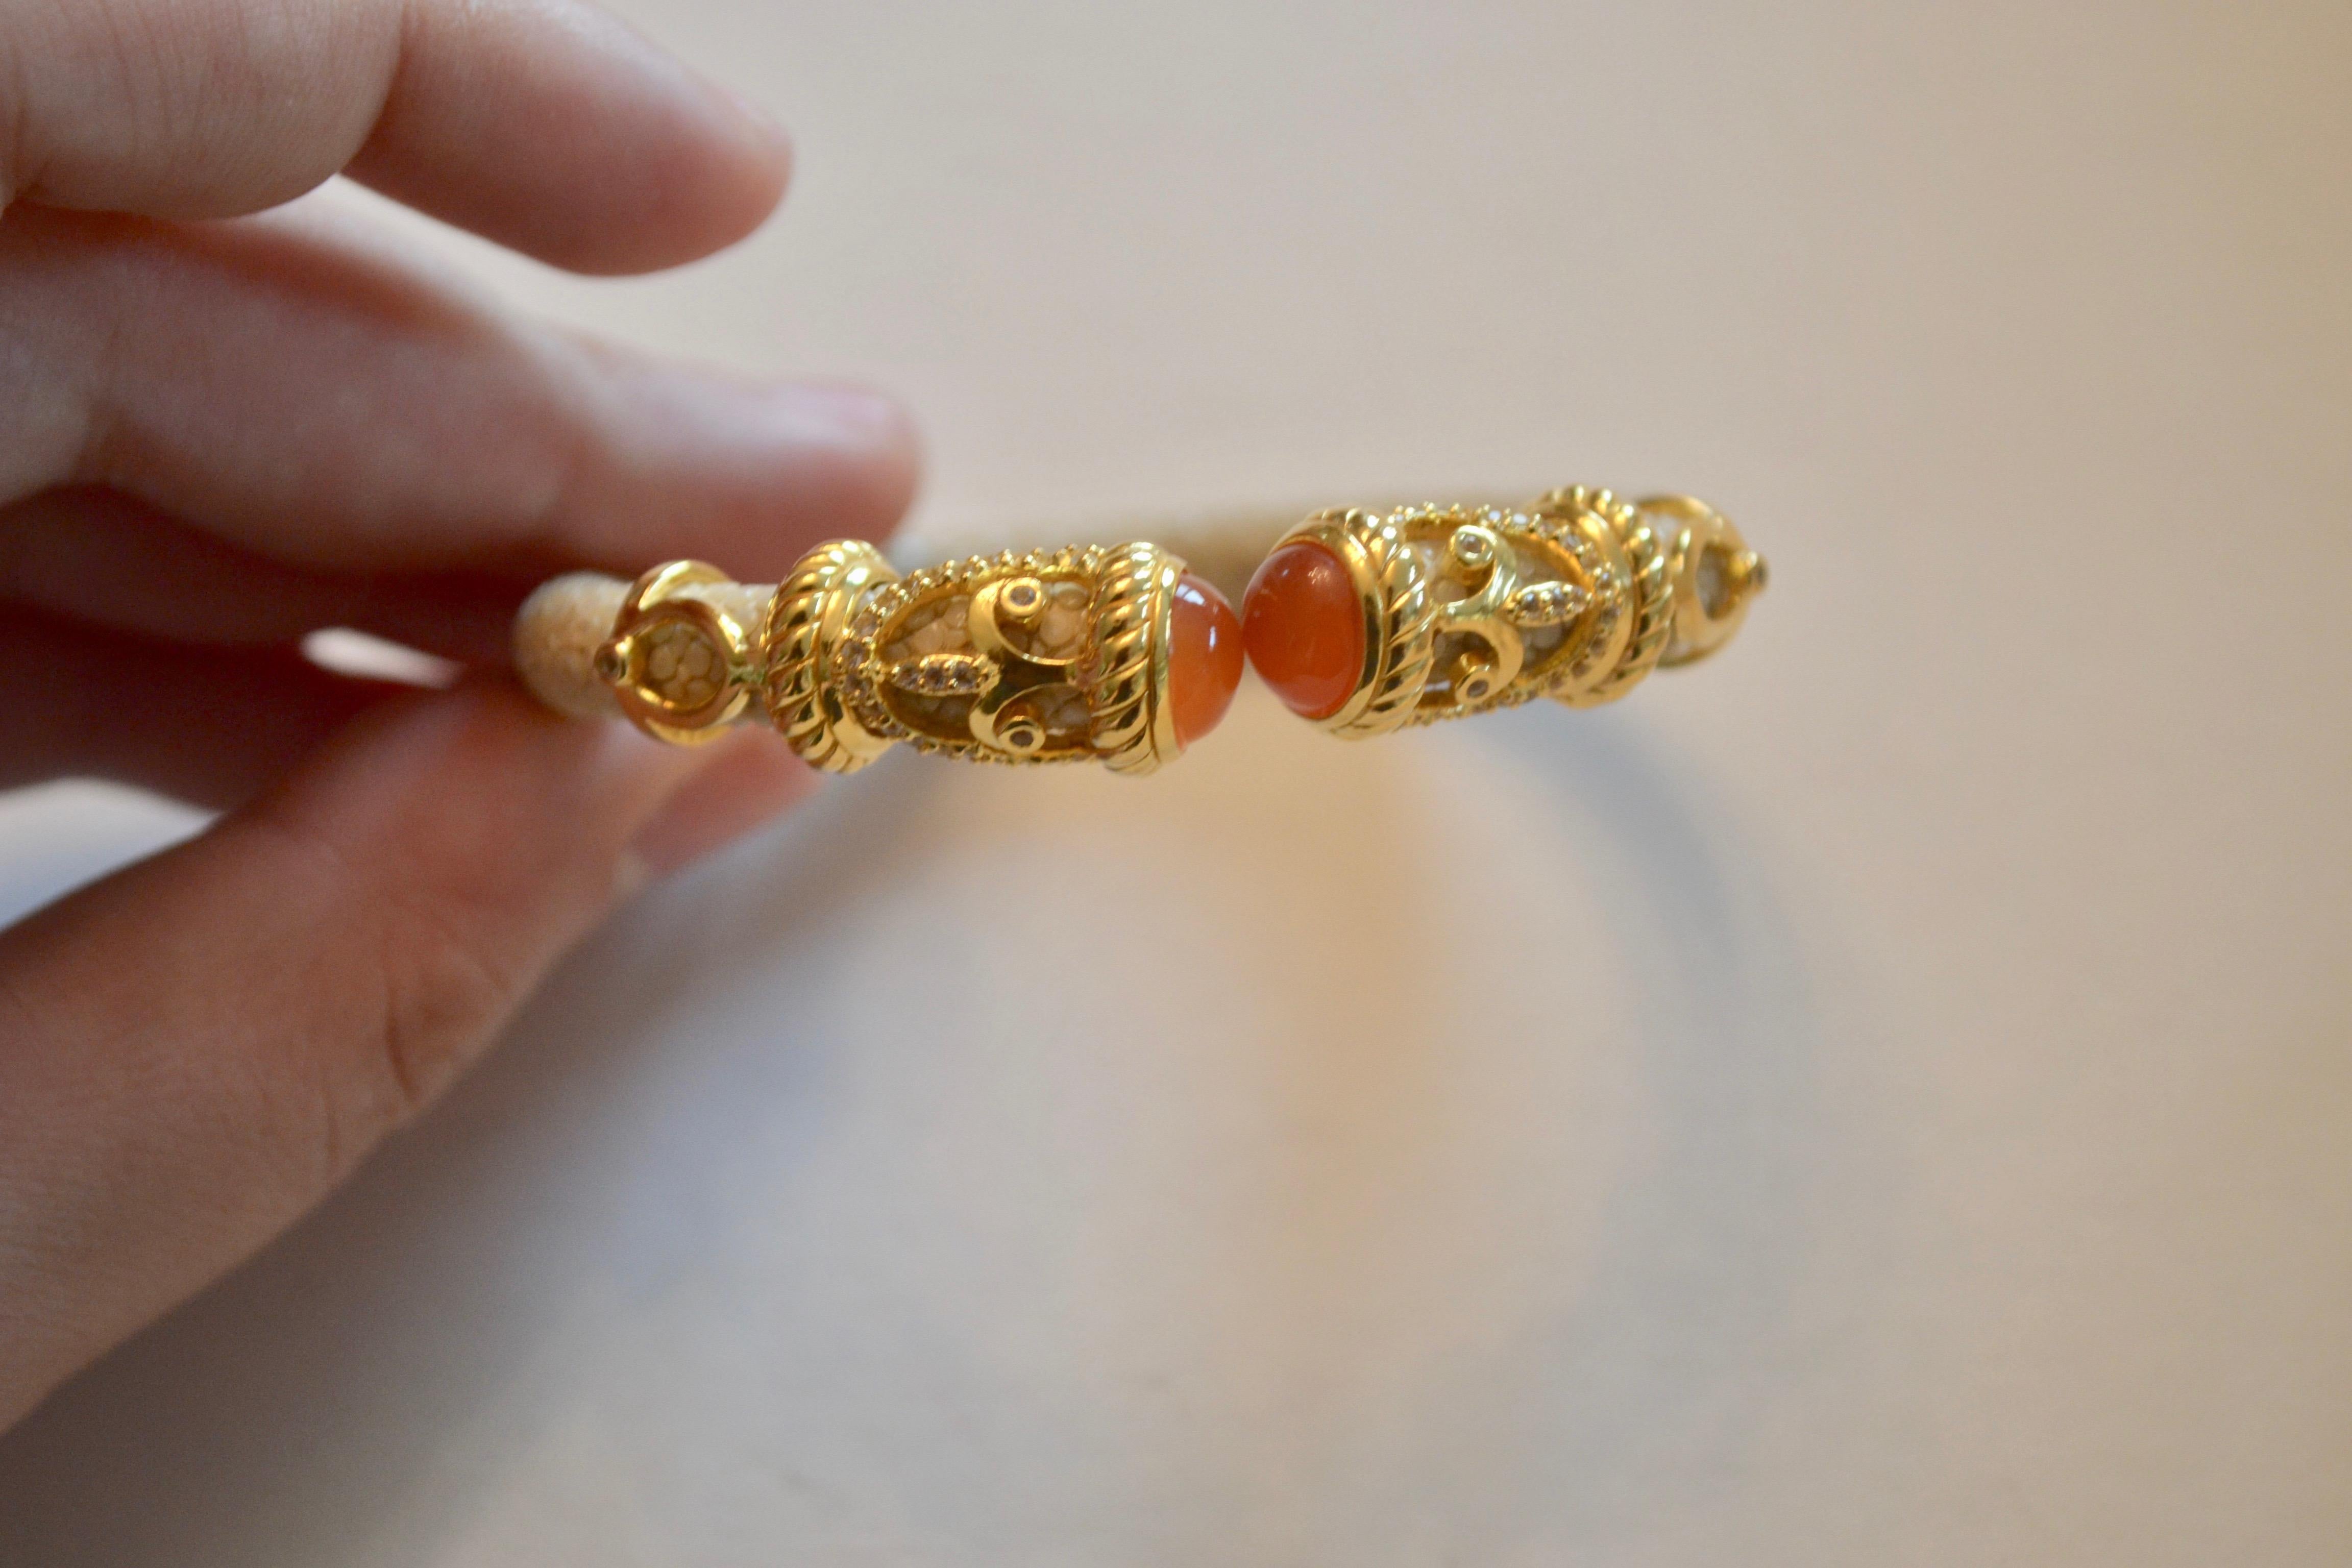 Natural stingray and carnelian stone bracelet with gold plate scroll detailing from Cristina Sabatini. 